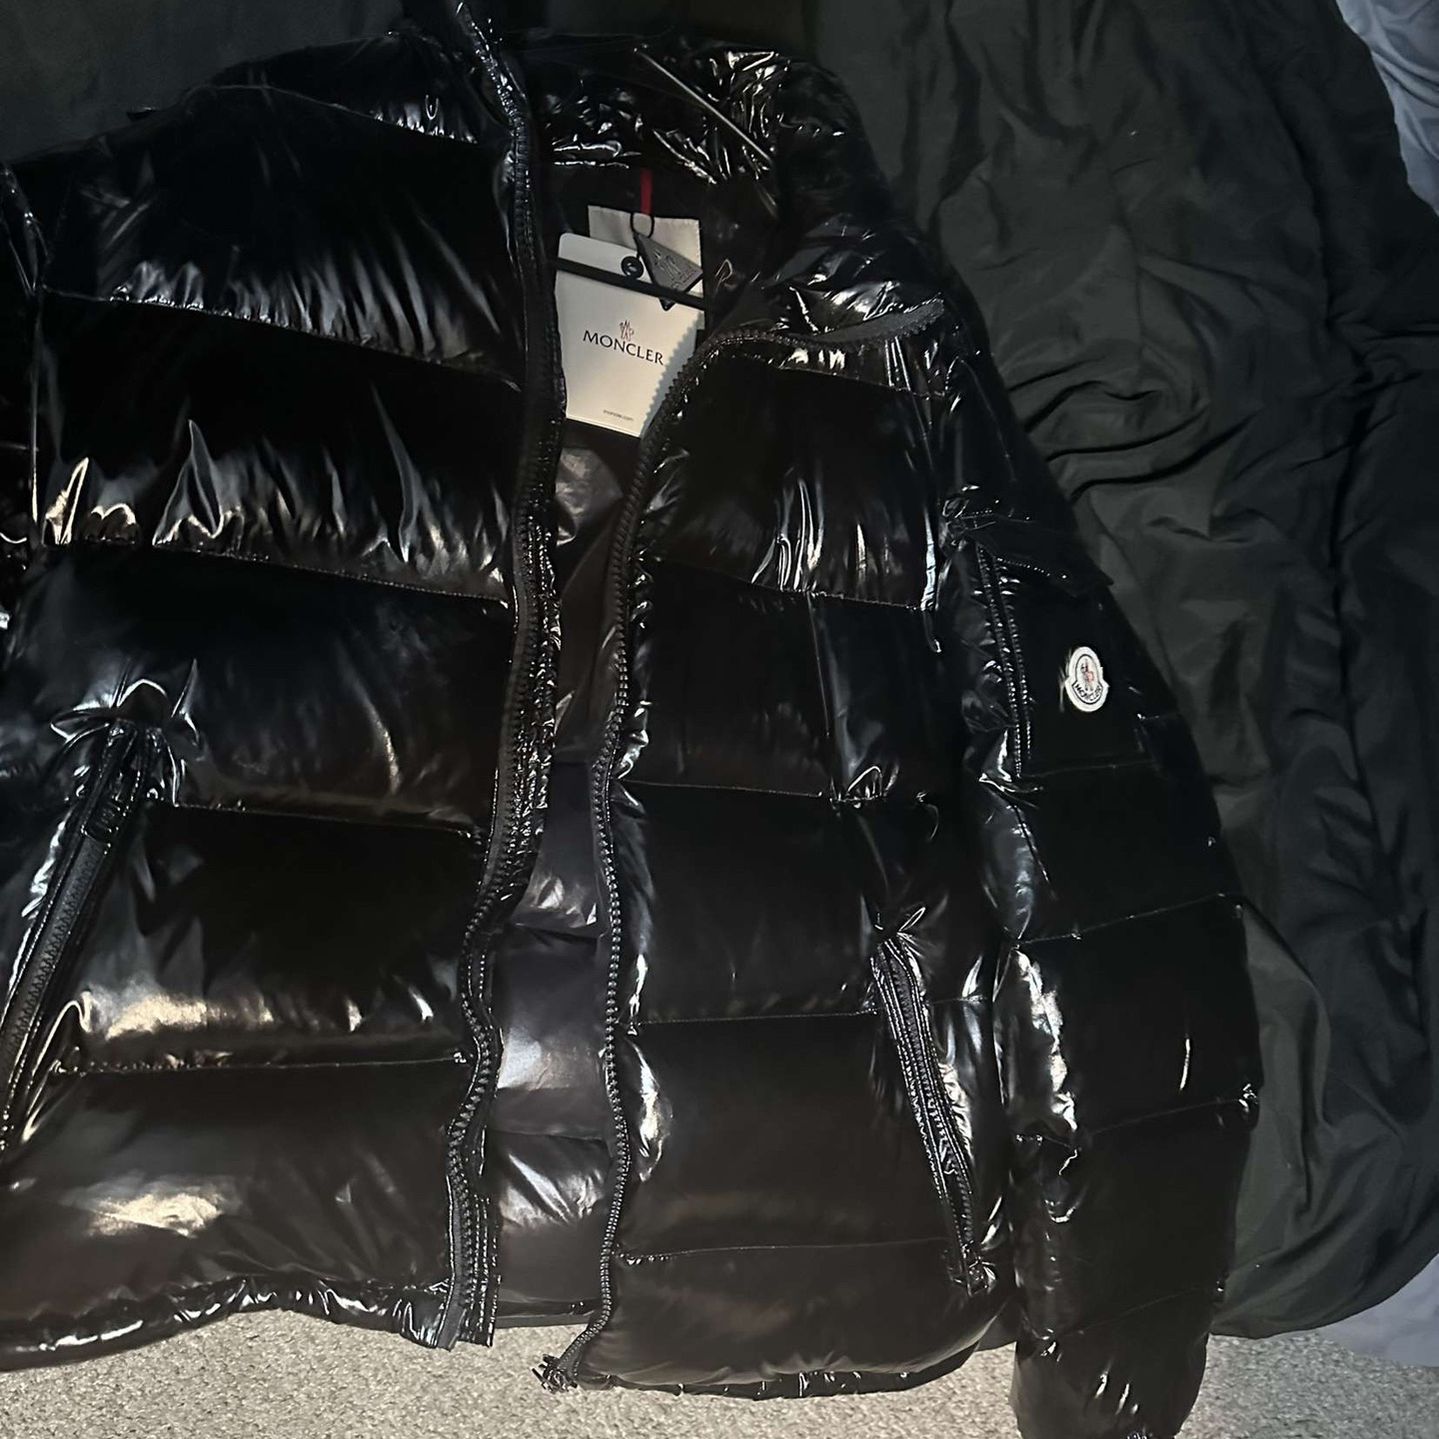 Moncler Puff Jacket Willing To Take Low Offers